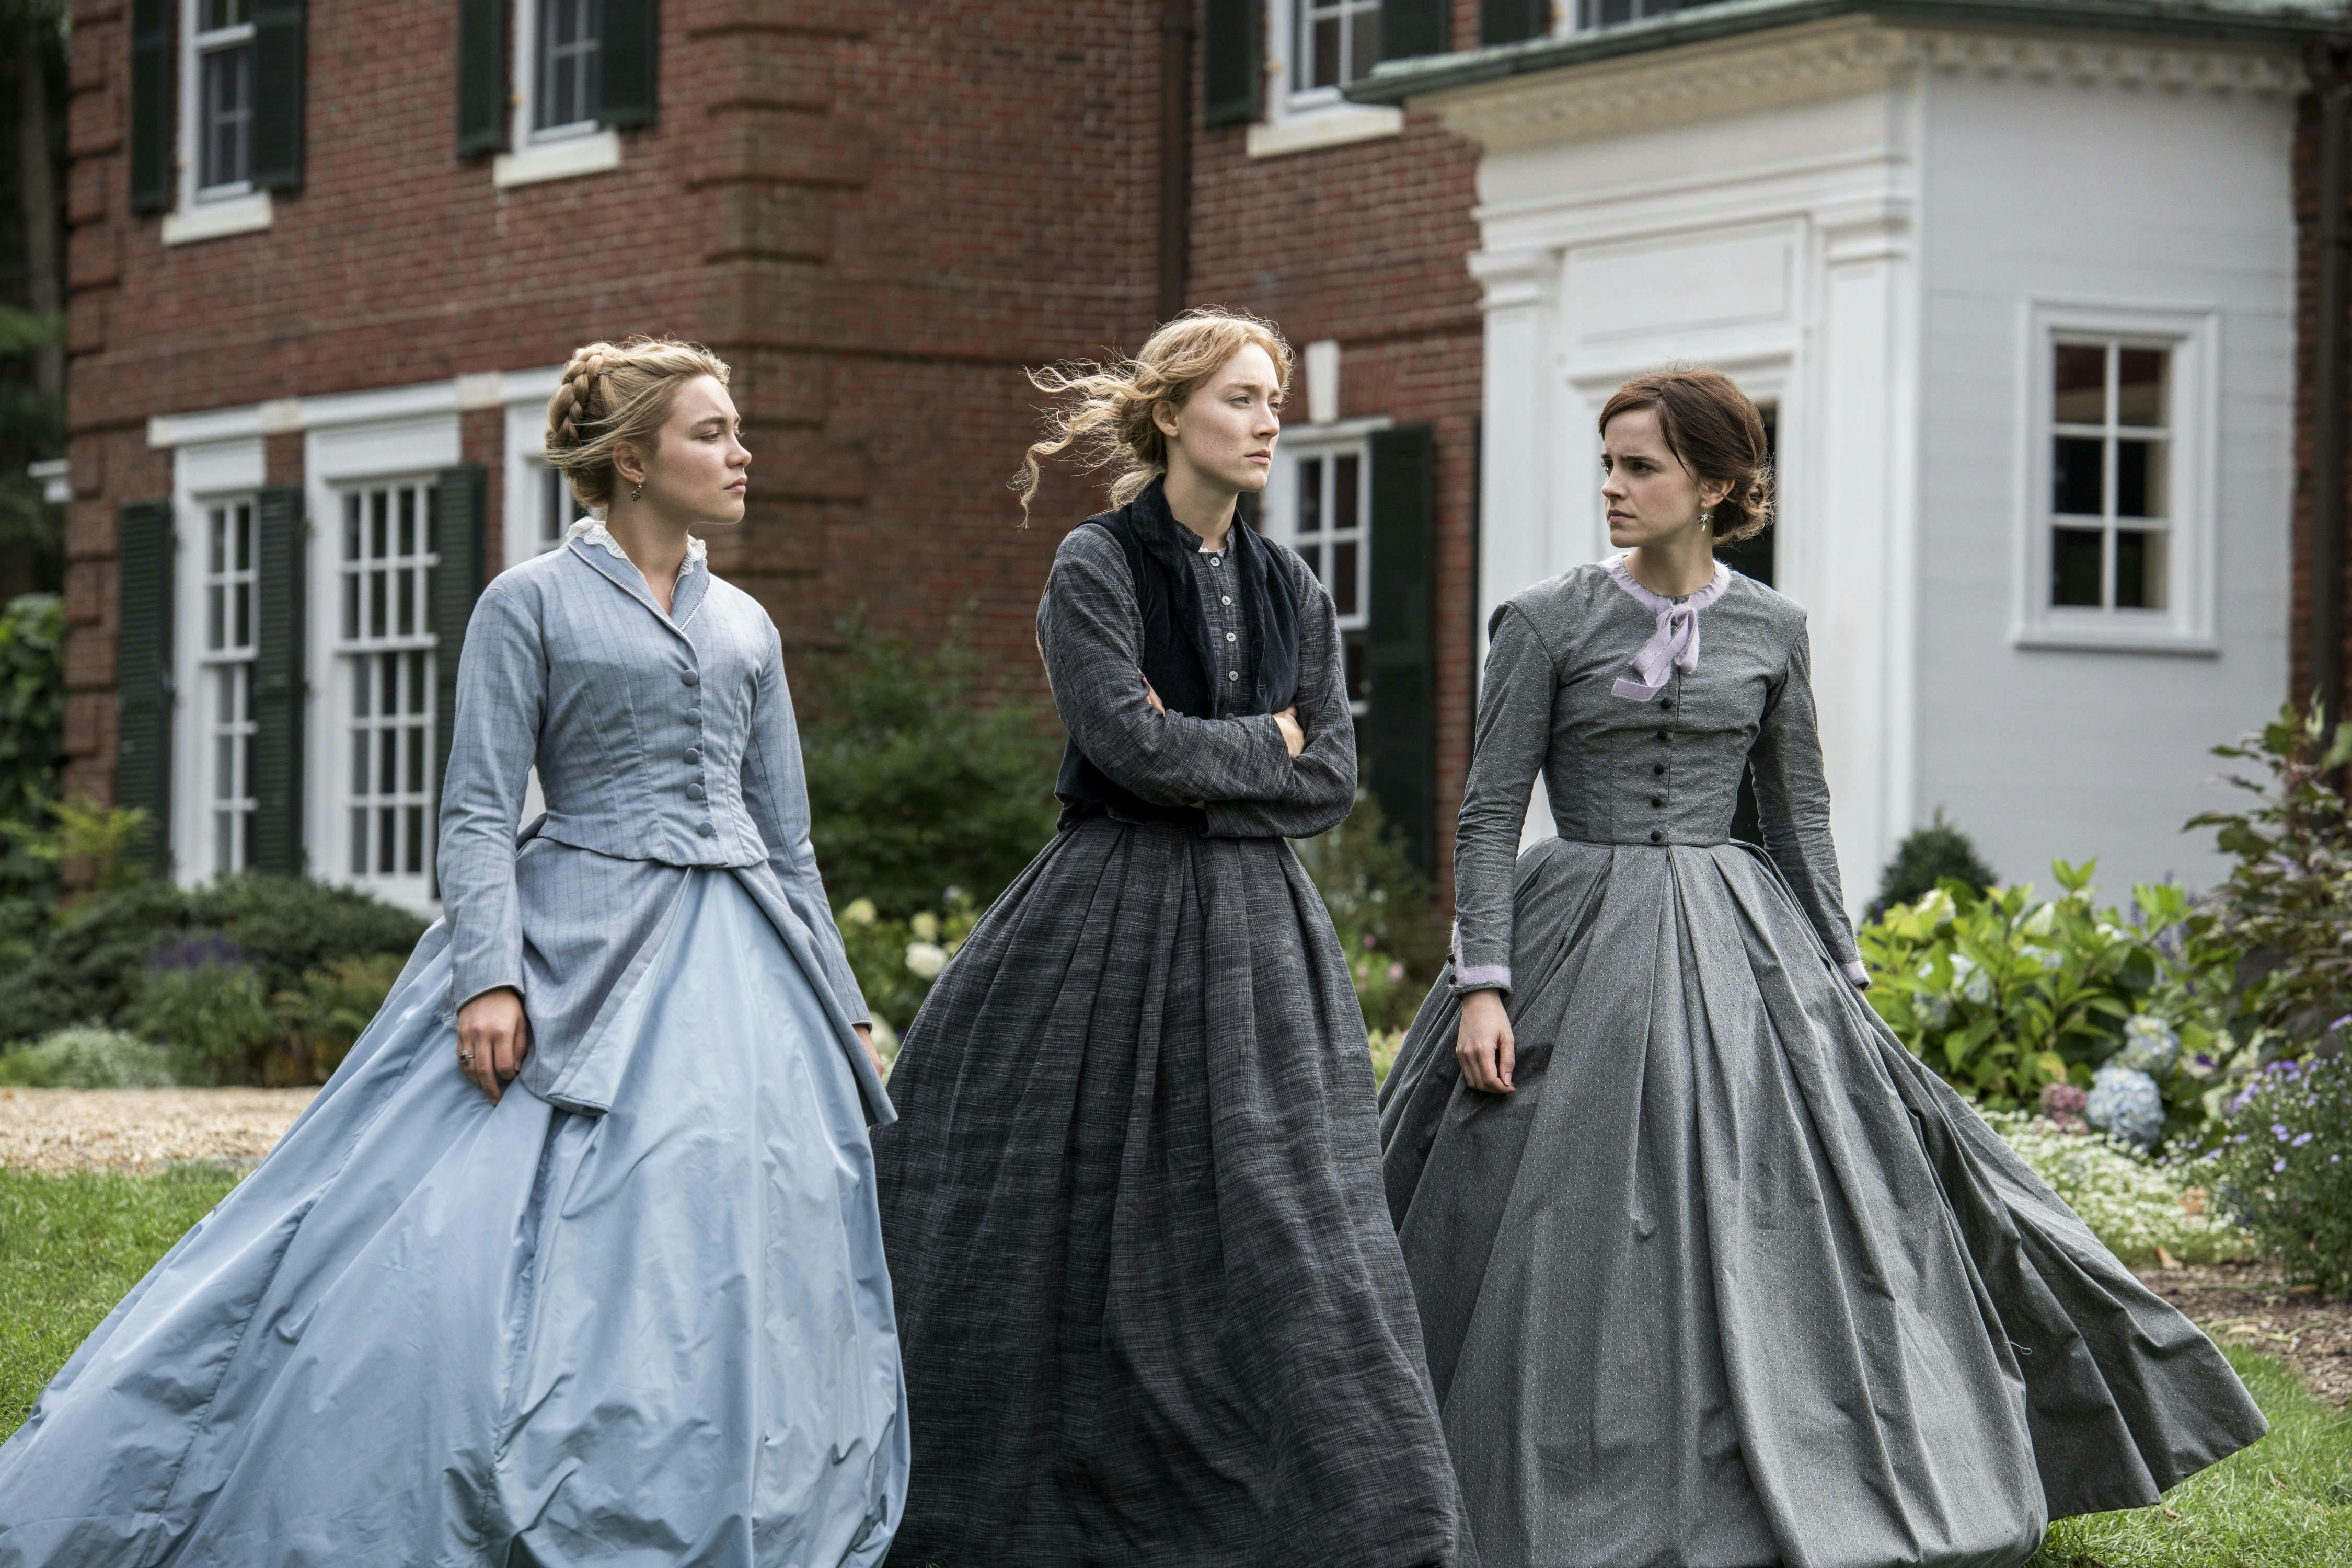 Florence Pugh, Saoirse Ronan and Emma Watson striding in period costume in a still from 'Little Women' (2019).